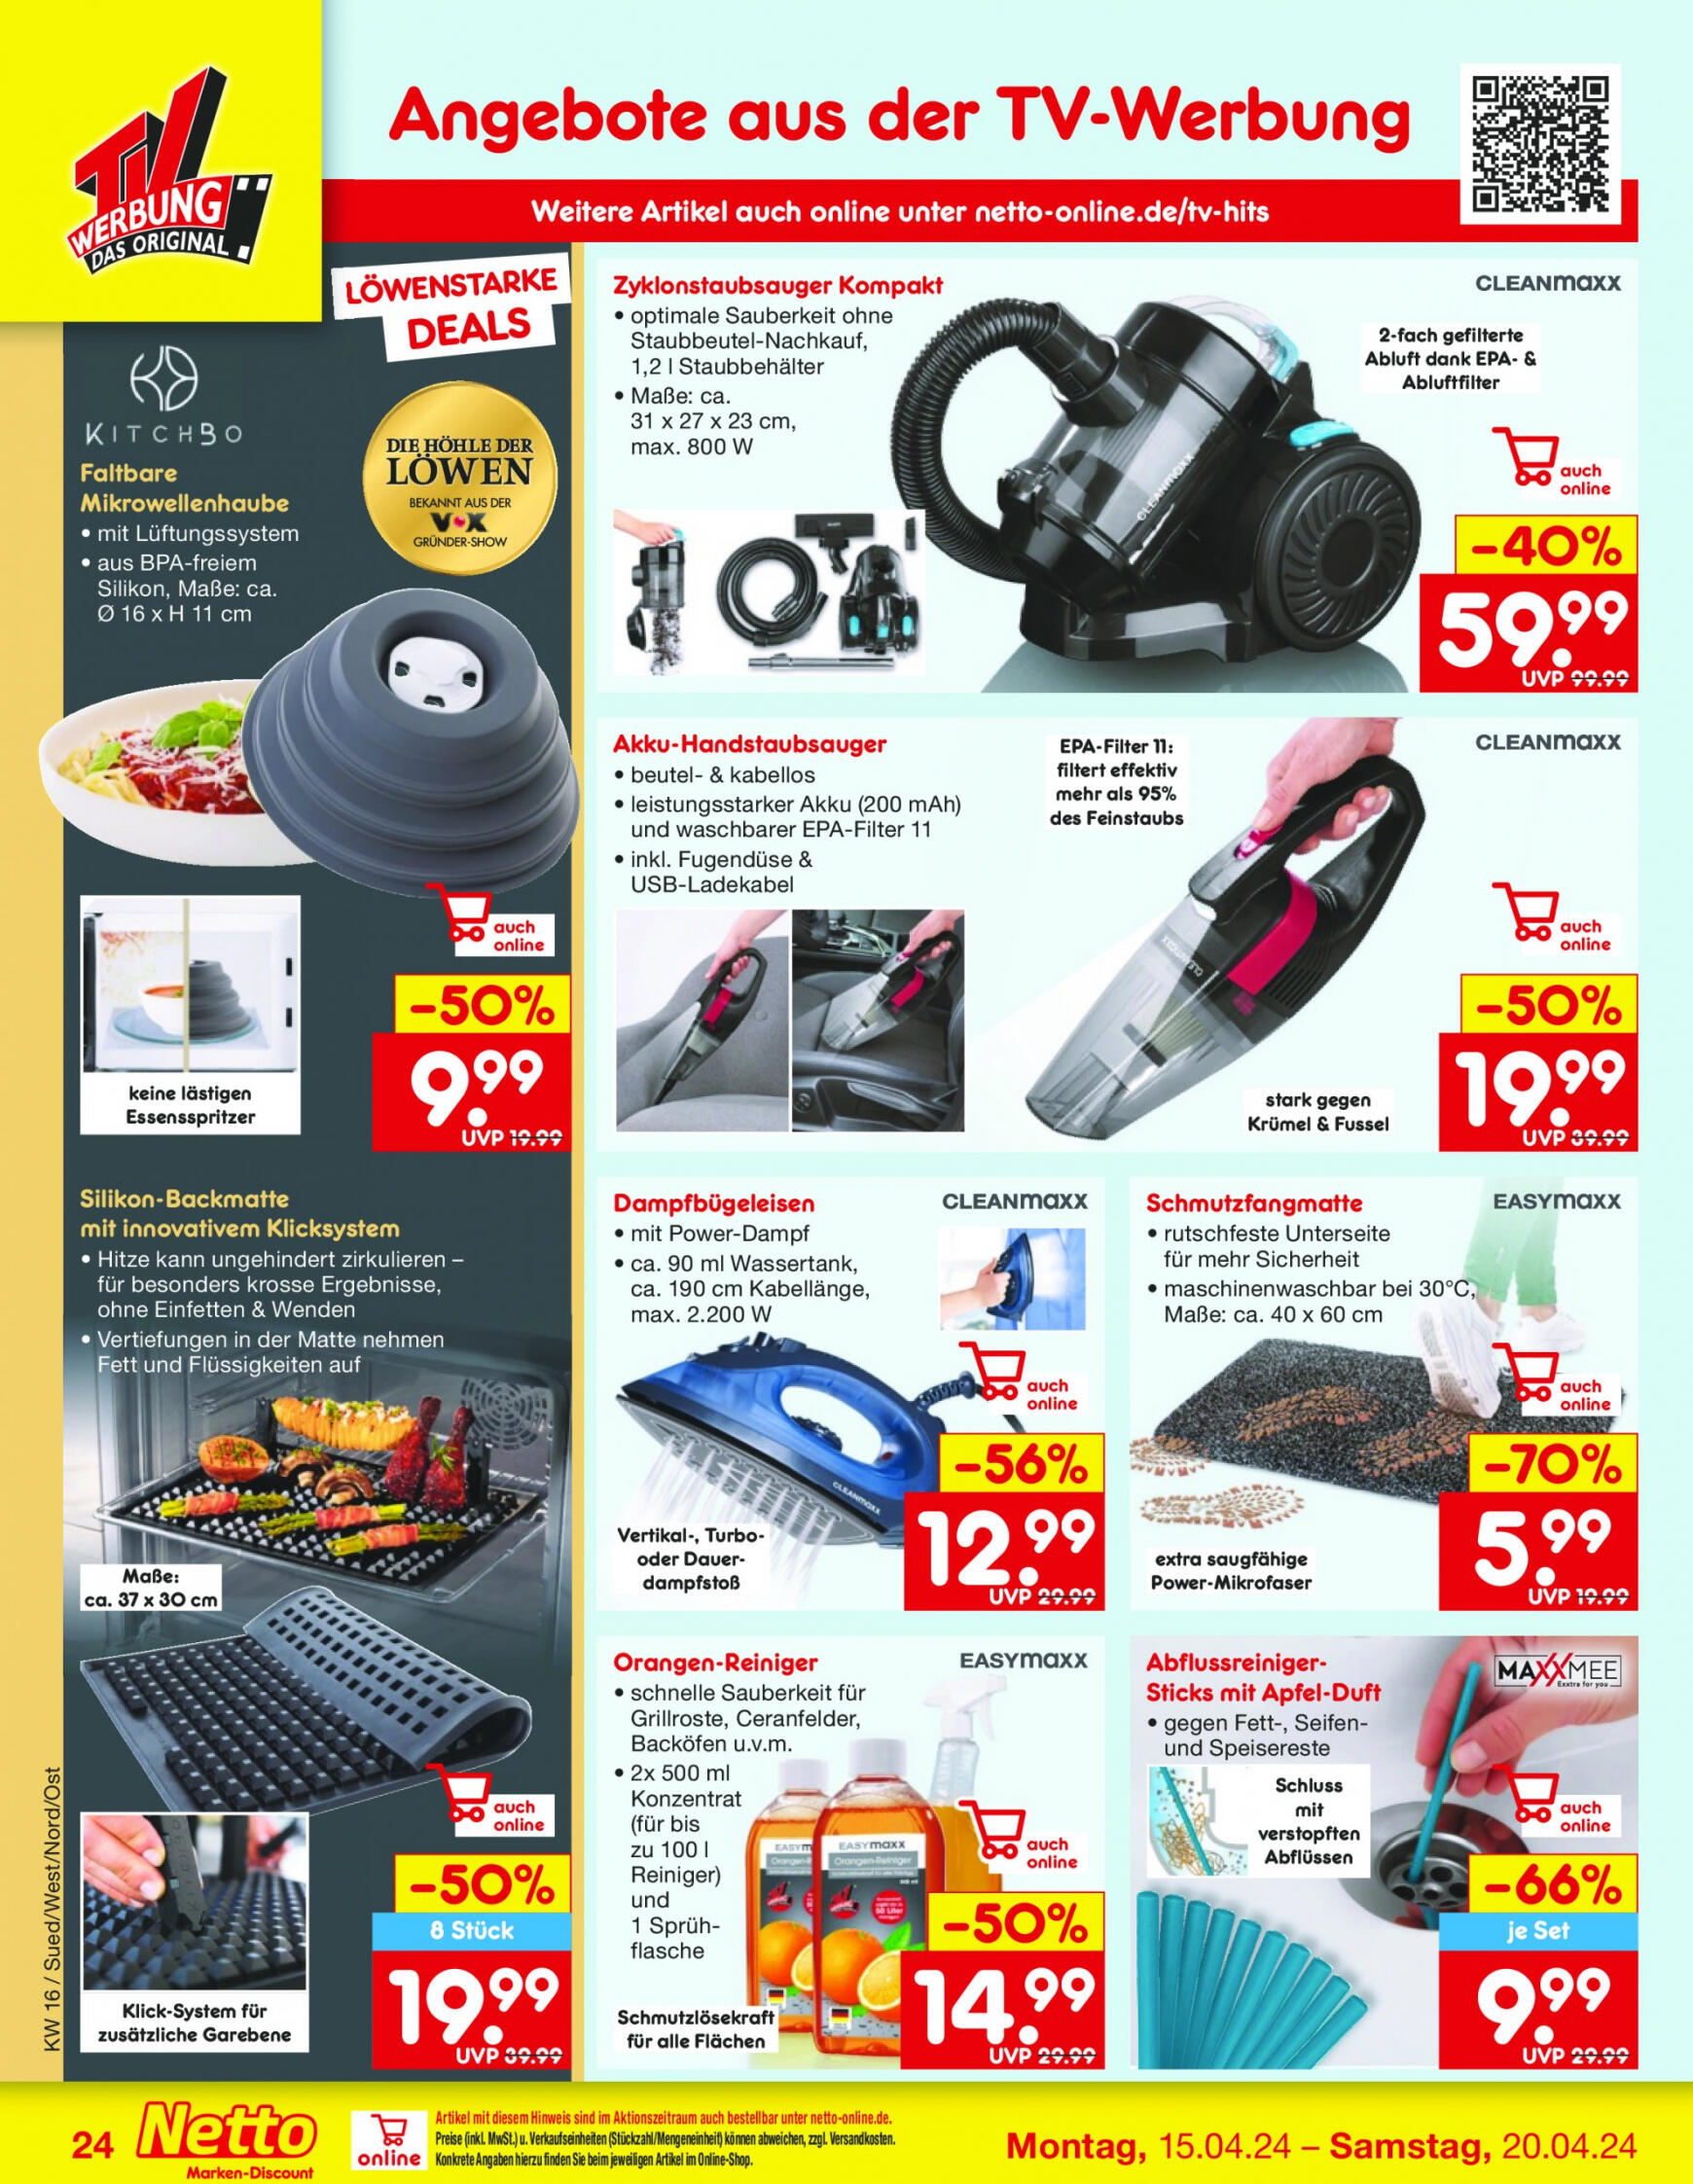 netto - Flyer Netto aktuell 15.04. - 20.04. - page: 30